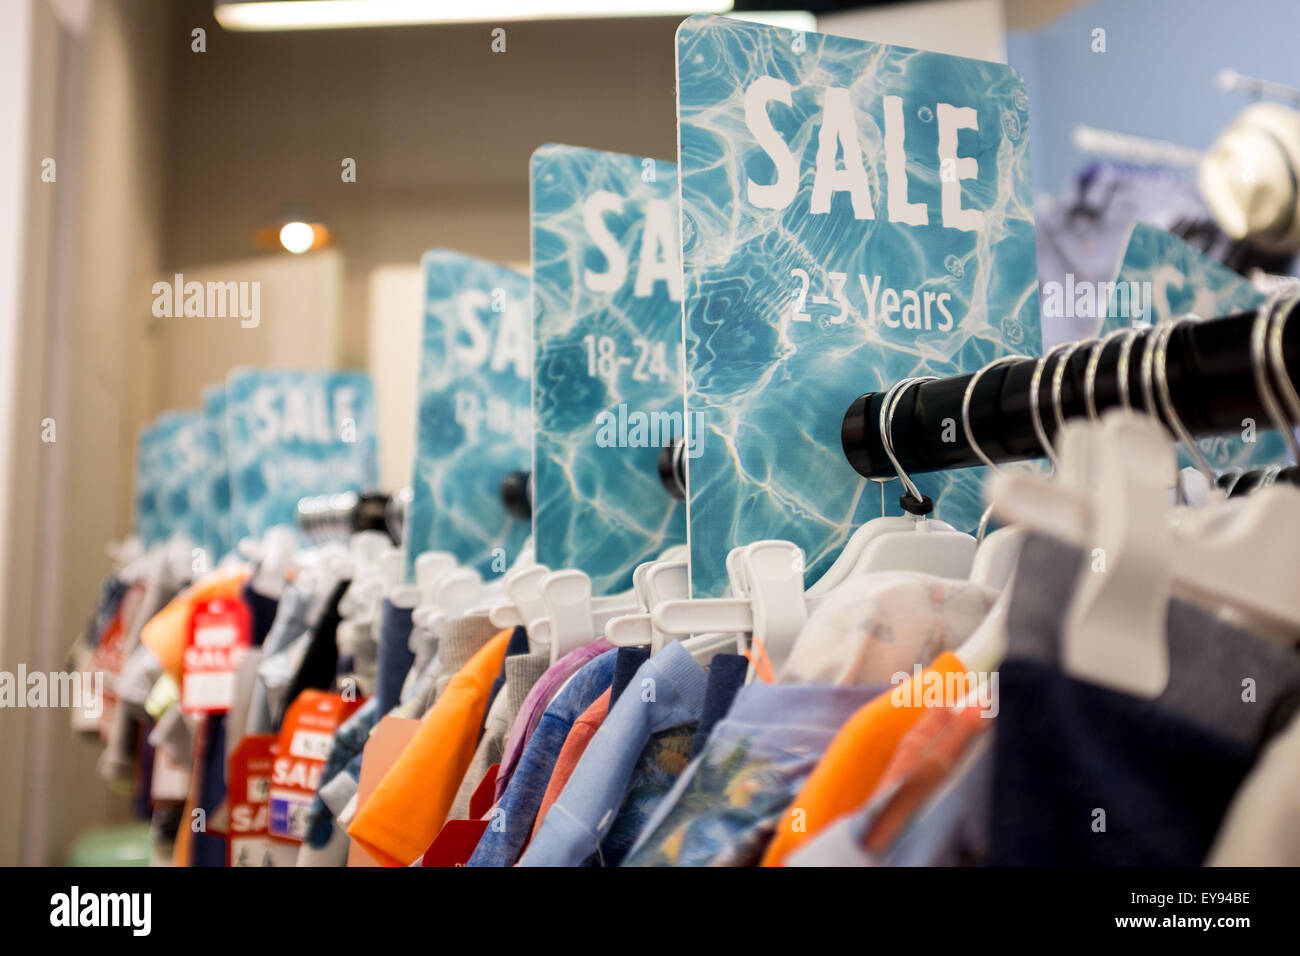 A rail of clothing in the sale at a british shop Stock Photo